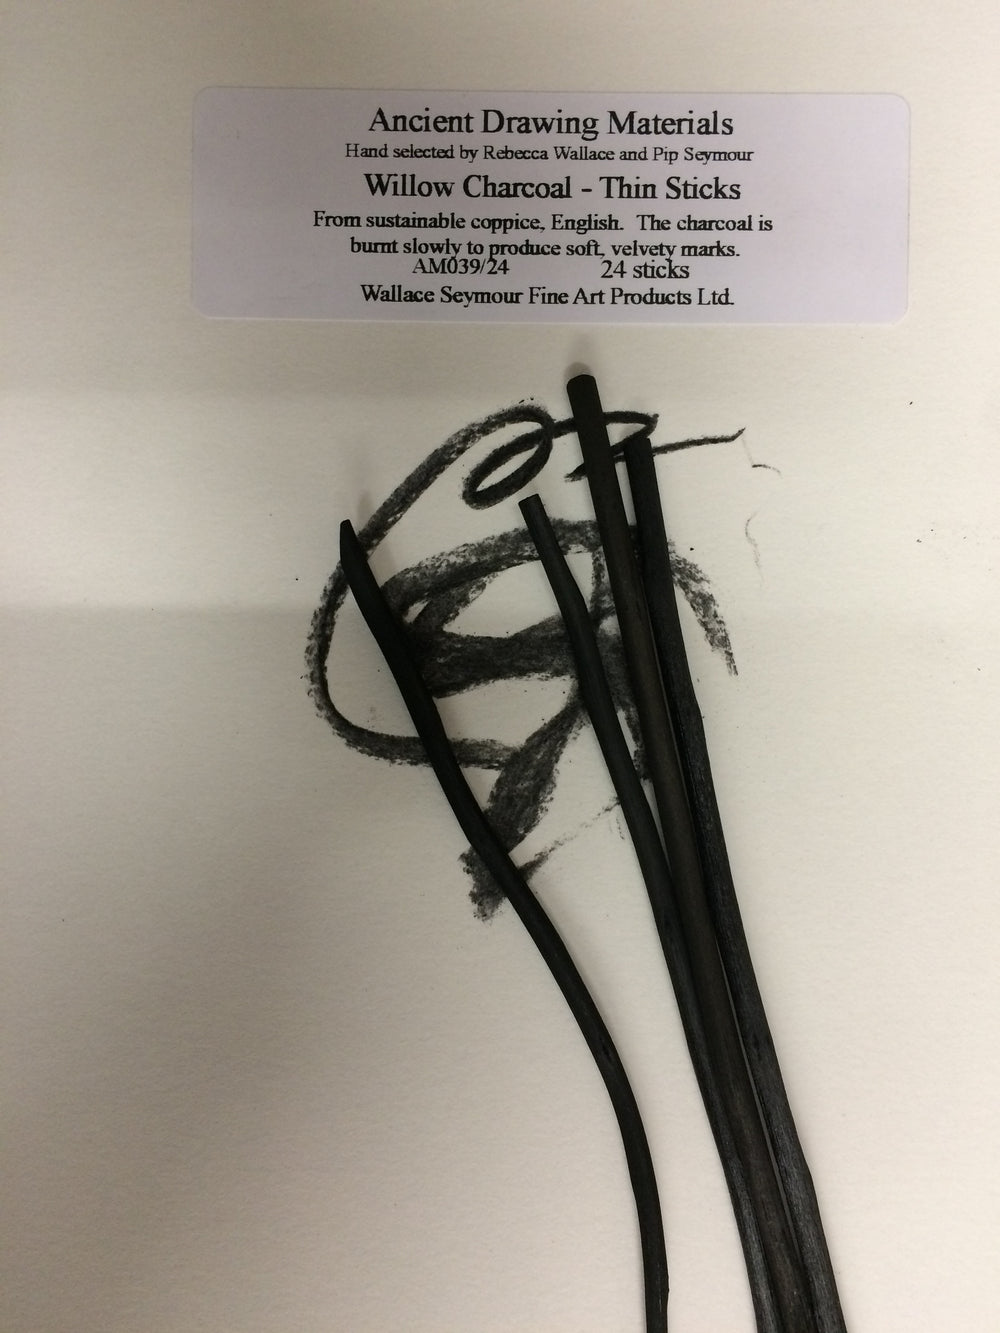 Willow Charcoal - Thin Sticks